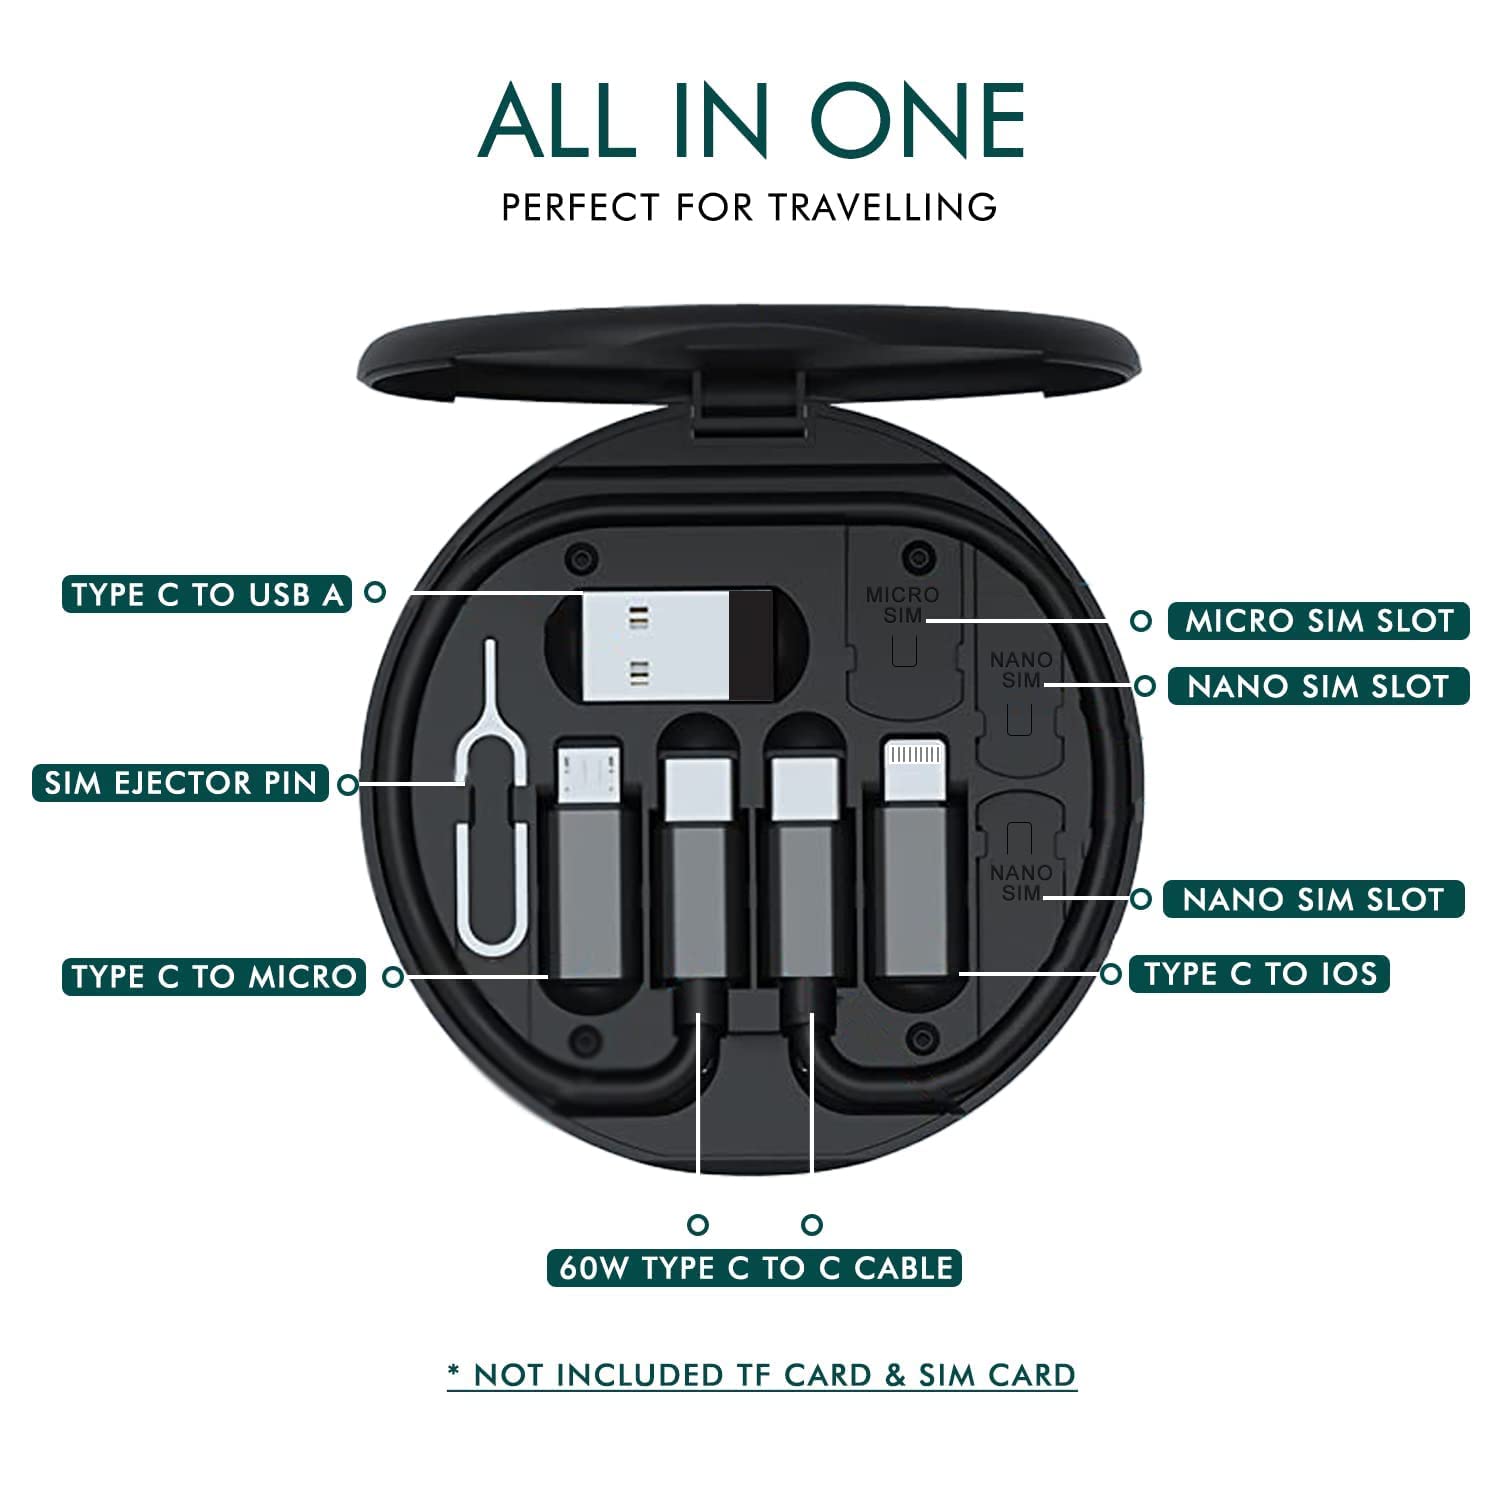 All in one Quick Charging Data Cable Storage Kit And Hidden Holder, All Usb Cable Kit Universal Smart Adapter Card Storage Box, type c charger, usb type a, charger type, usb cable, usb port, data cable, charging cable, micro usb to usb cable, usb c, usb type c, type c, usb c charger, usb c cable, usb c to usb adapter, usb to usb c, usb c port, usb to usb cable, type c to usb, type c adapter, usb to type c, usb cable types, usb a to c, type c to usb adapter, usb type c cable, types of usb ports, types of charger, micro usb to type c, type c to micro usb, usb to c adapter, types of charging cables, fast charger type c, type a cable, type c port, fast charging cable, usb charging cable, a type charger, data cable type c, cable type, fast charging cable type c, usb charging, fast charging adapter, c type charger adapter, type of charger port, charging cable type c